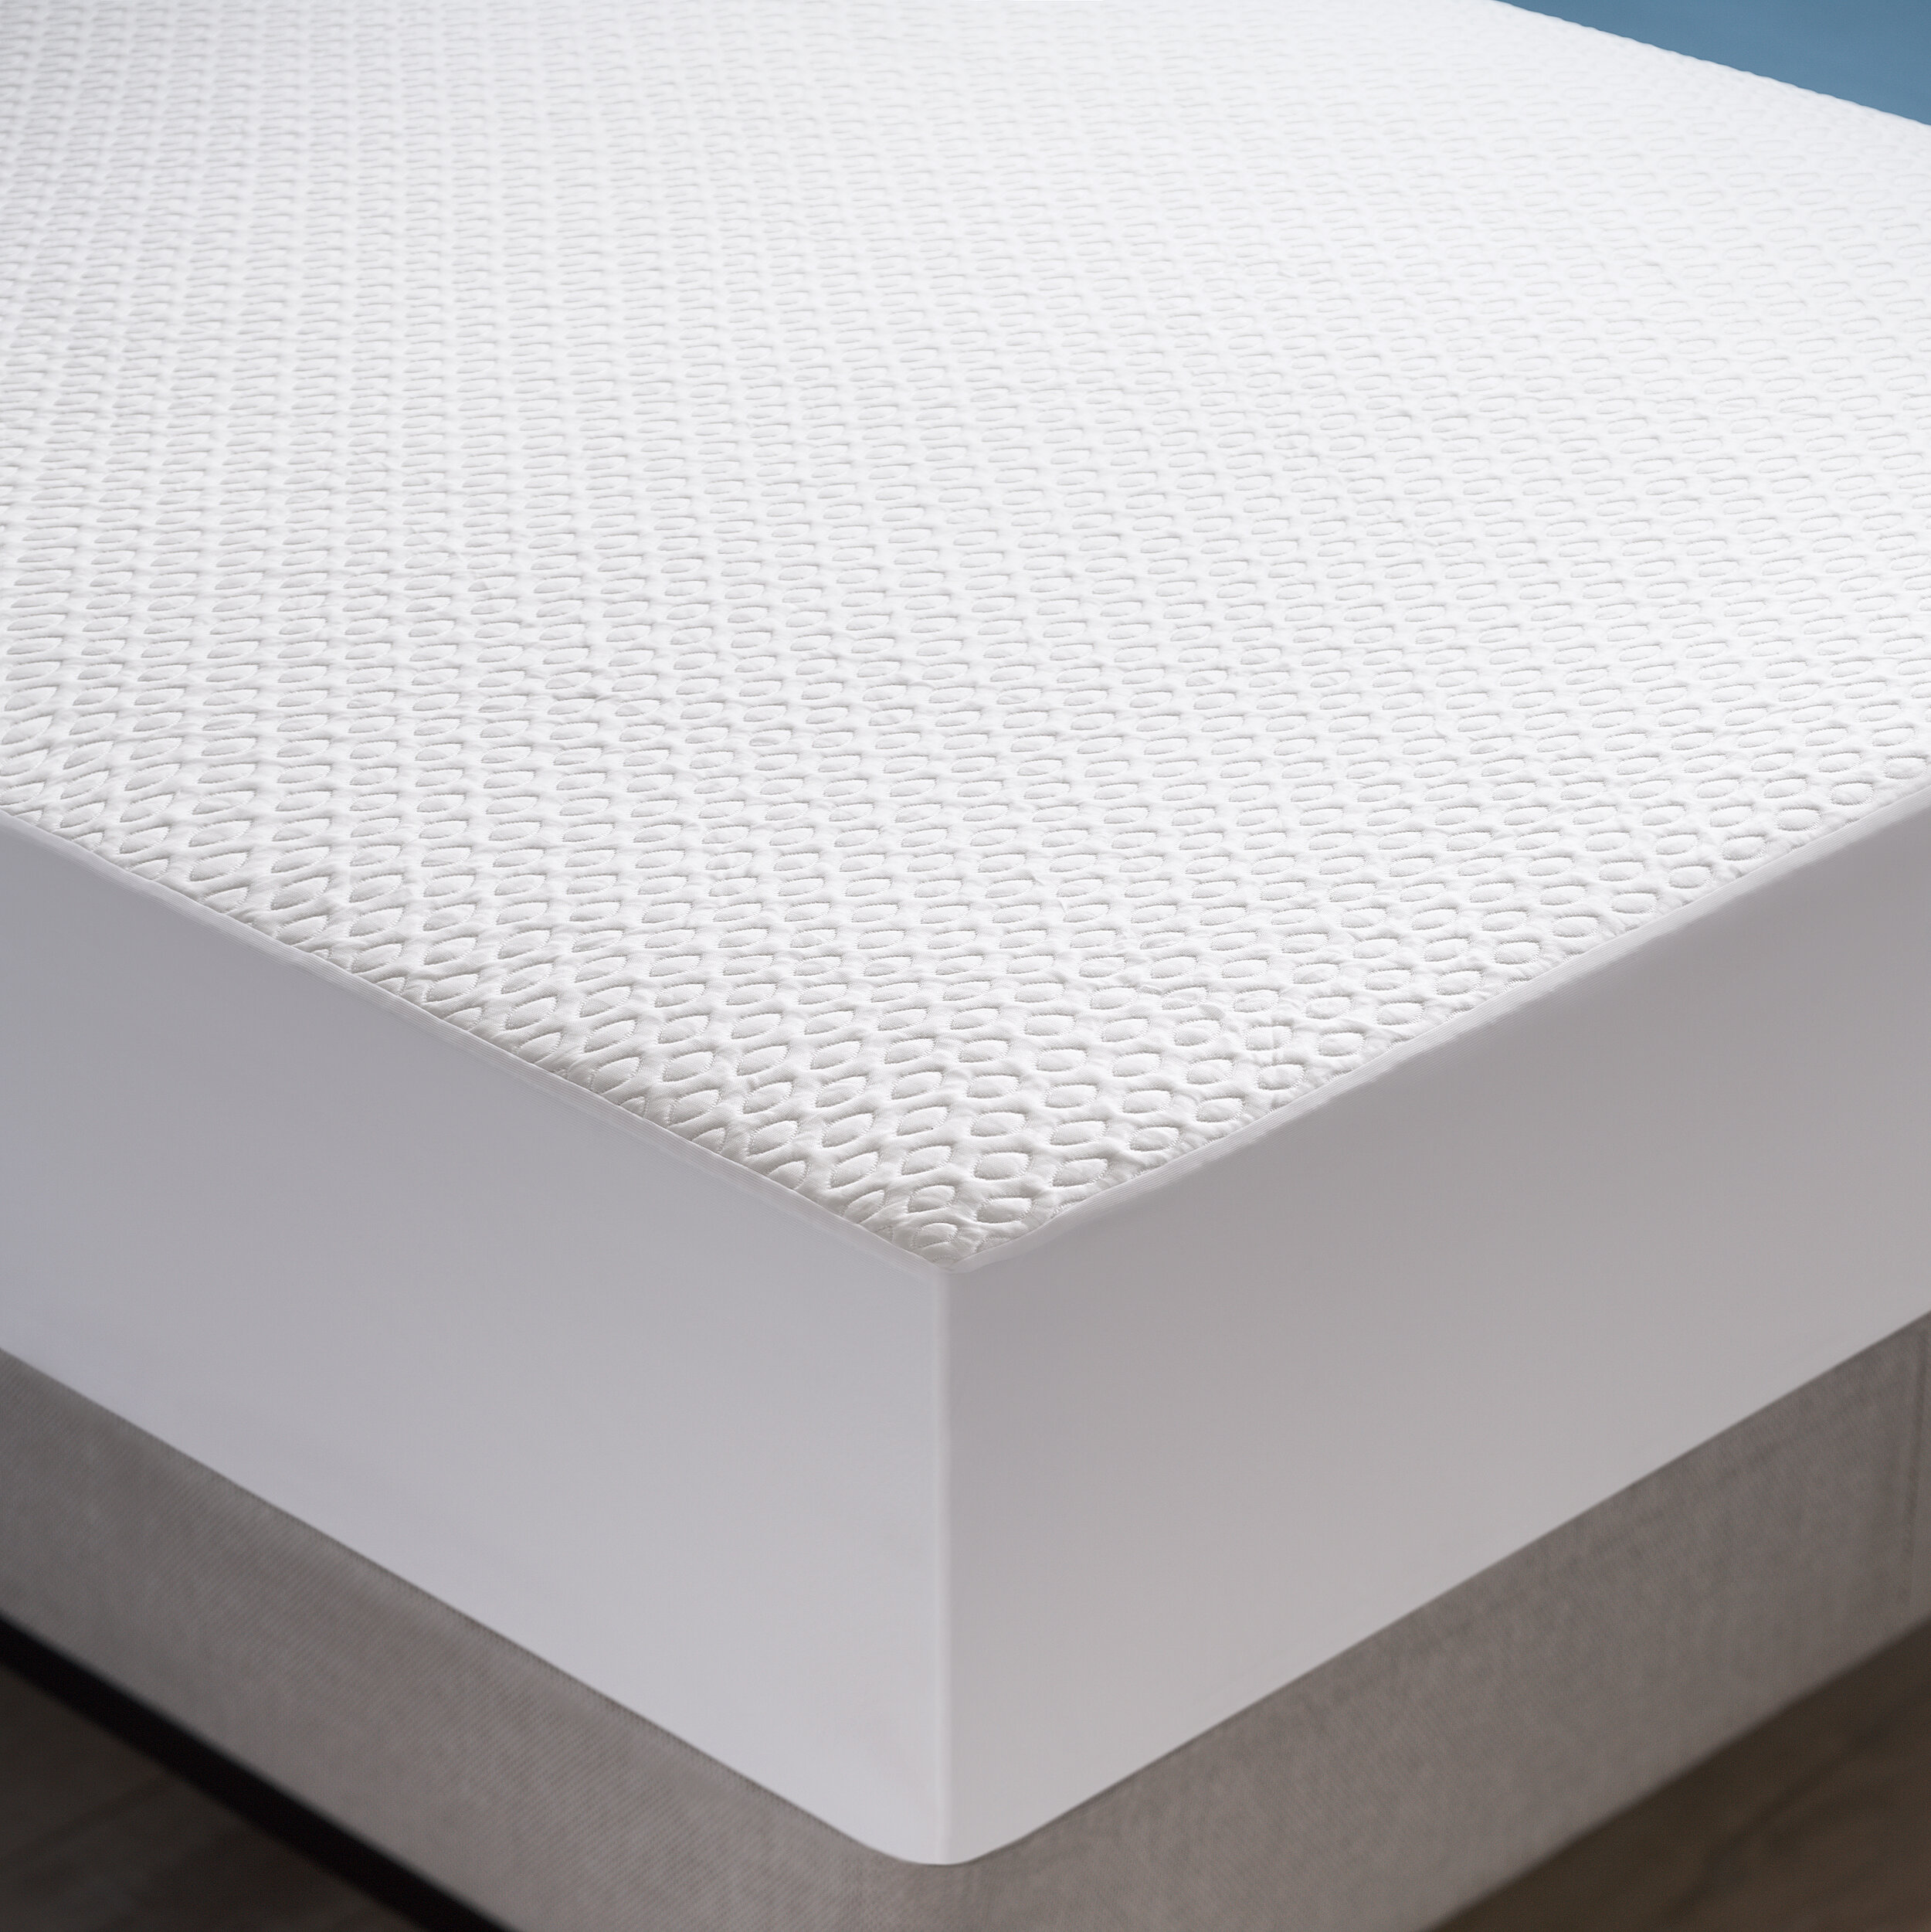 Yogabed Ultra Cool Waterproof Mattress Protector